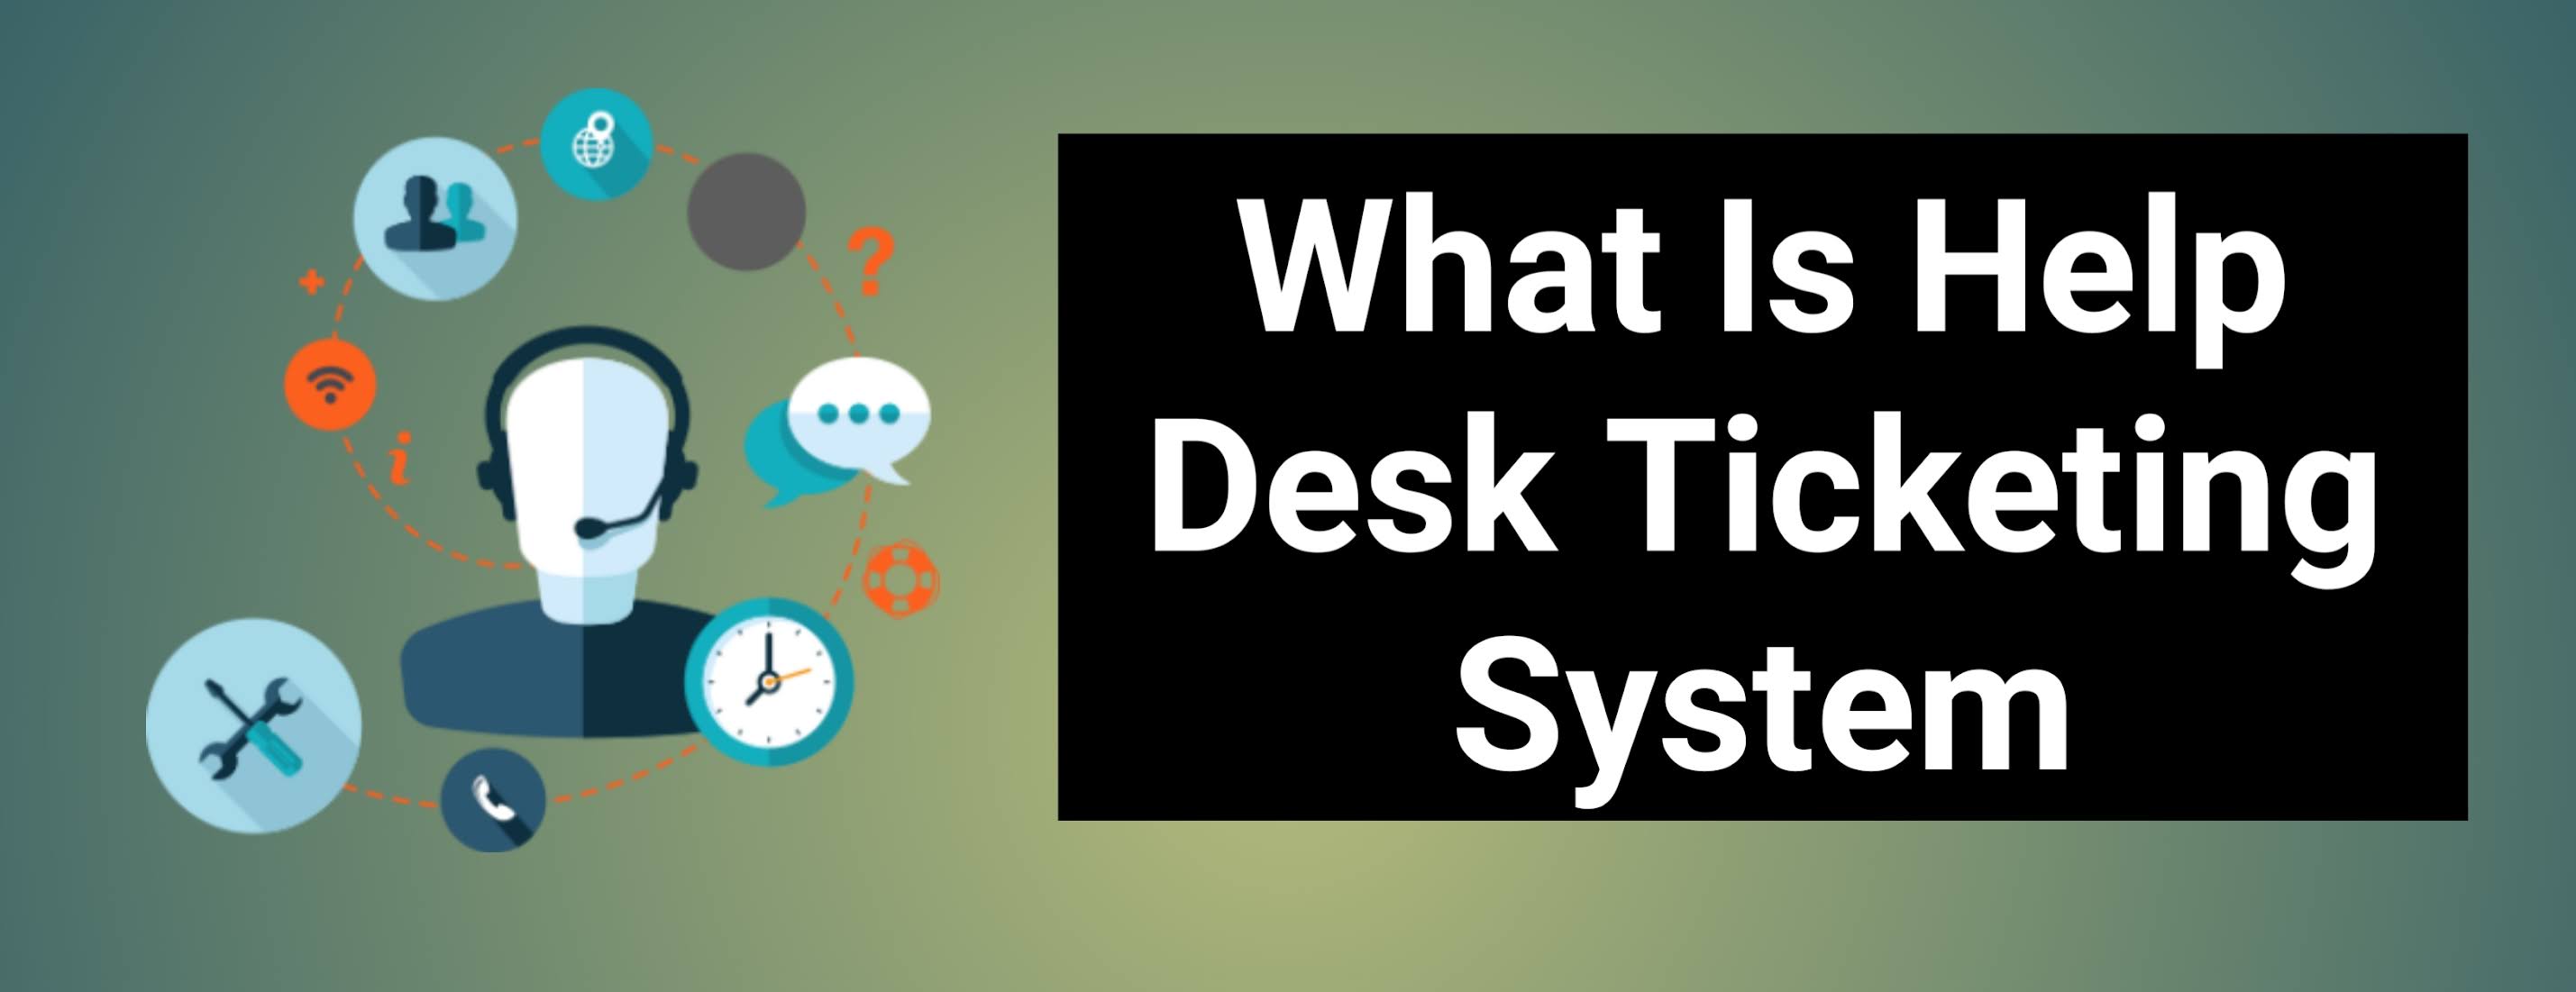 What Is Help Desk Ticketing System